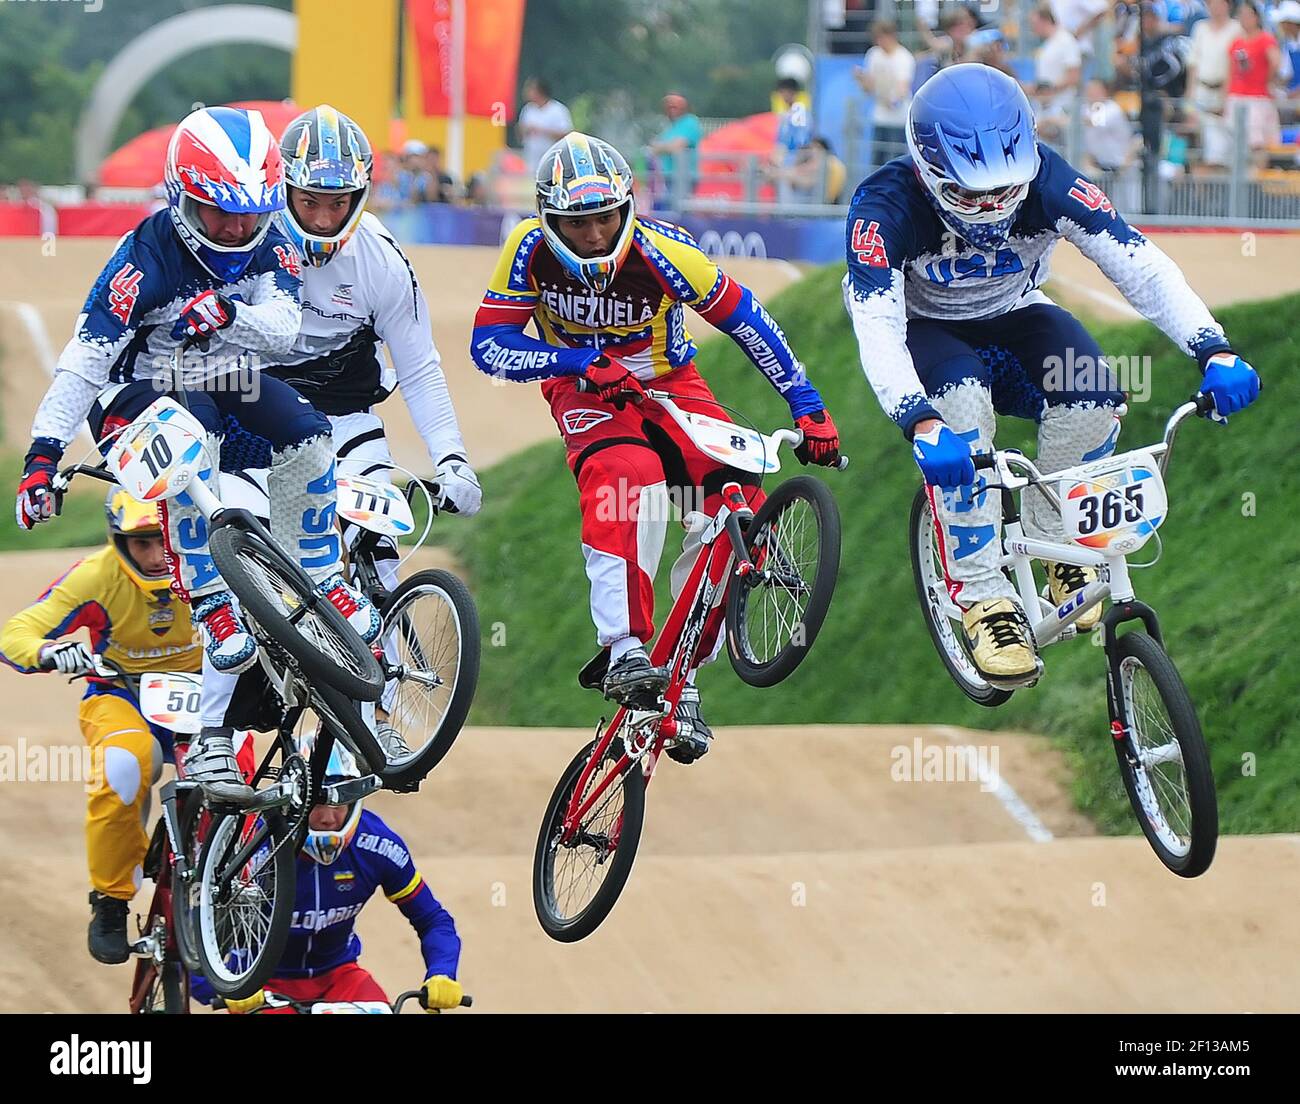 Riders fly over a jump in BMX racing on Wednesday, August 20, 2008, in the Games of the XXIX Olympiad in Beijing, China. (Photo by Jeff Siner/Charlotte Observer/MCT/Sipa USA) Stock Photo